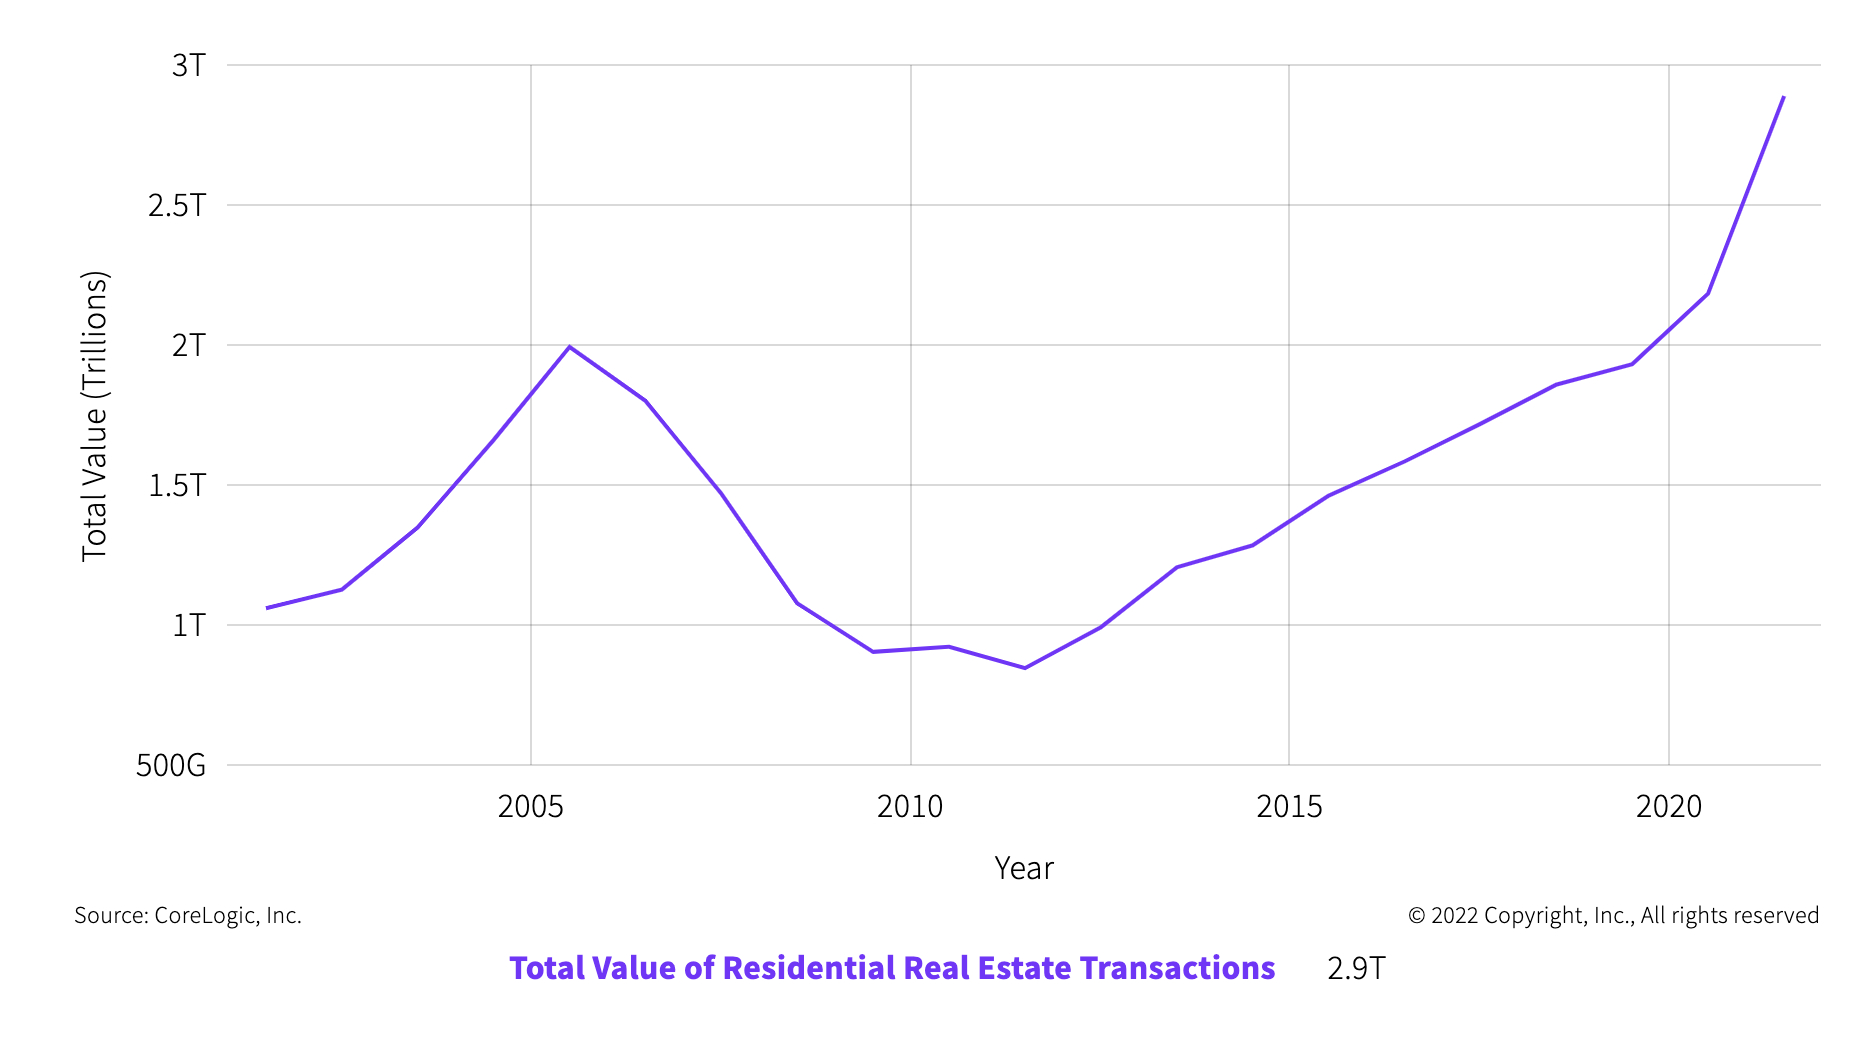 Source: https://www.corelogic.com/intelligence/2021-a-record-breaking-year-for-real-estate-transactions/